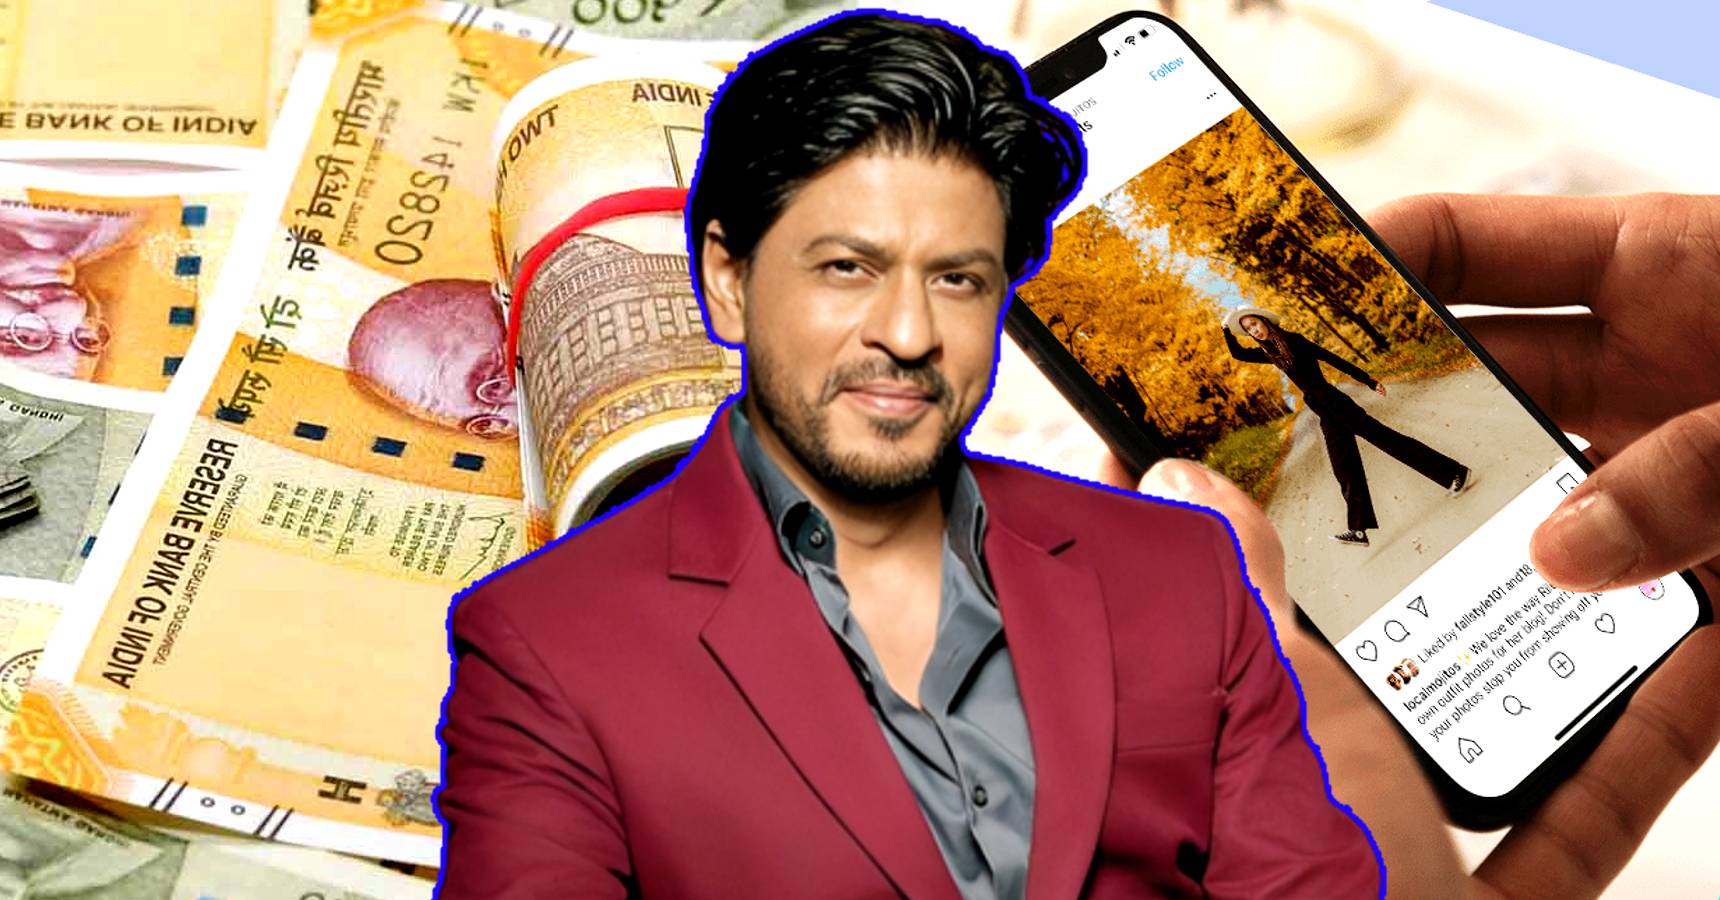 Bollywood actor Shah Rukh Khan’s earning from Instagram